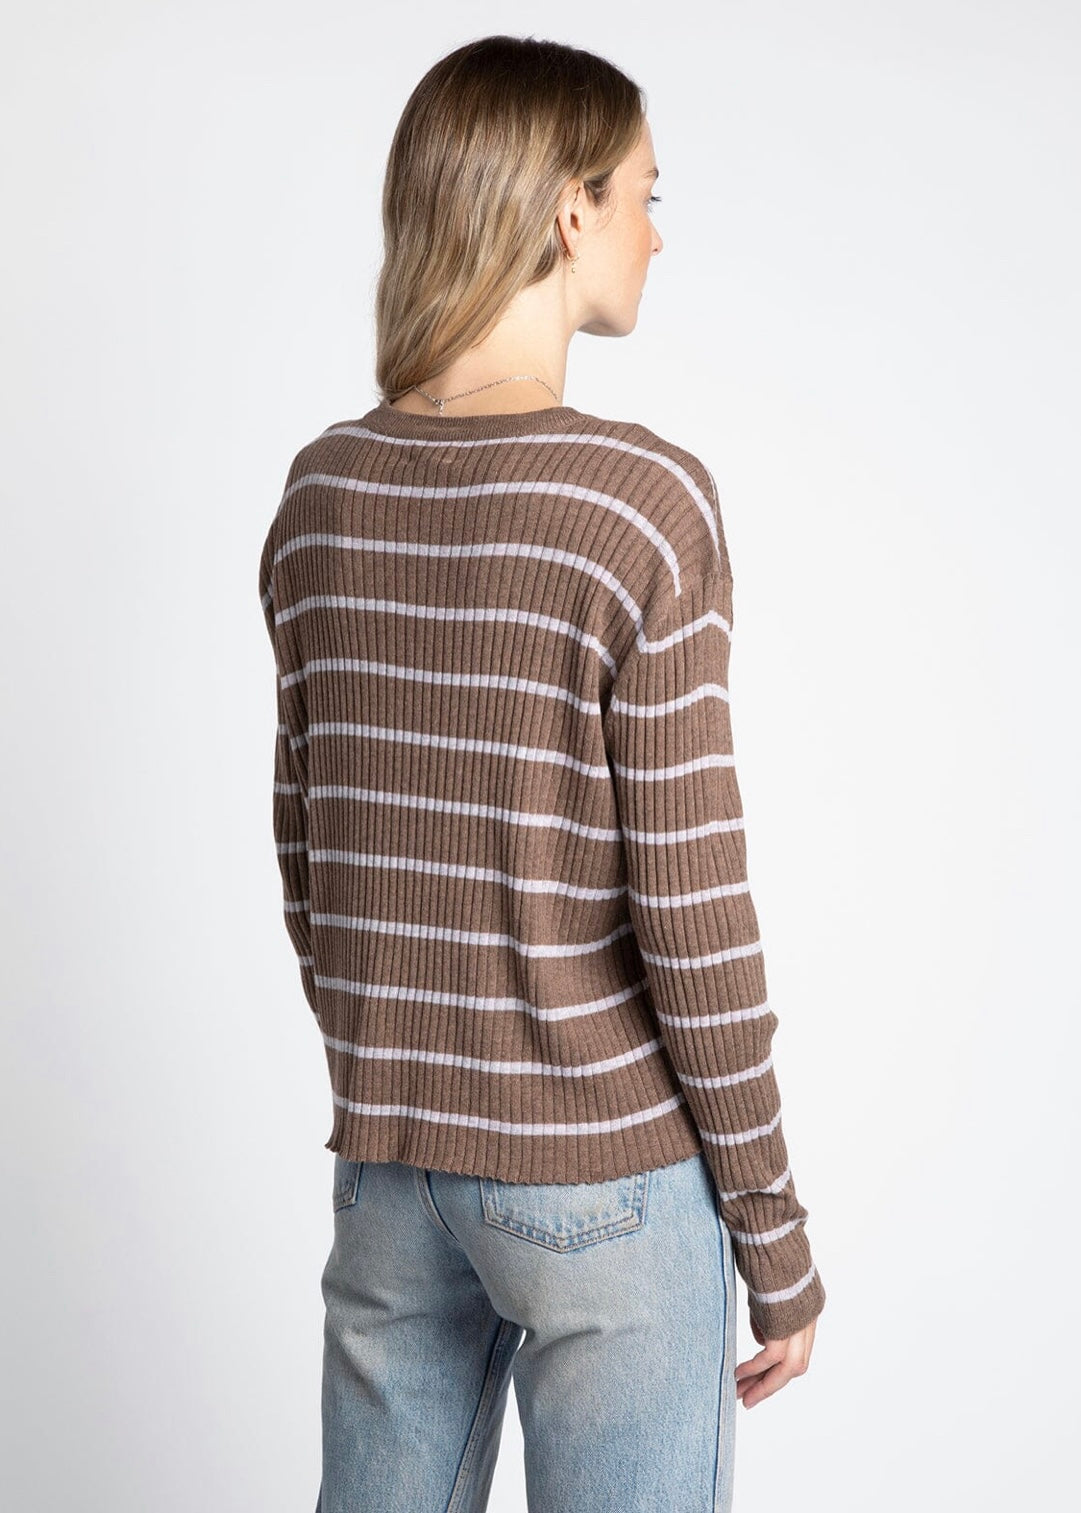 Raleigh Top in Flax Stone Stripe